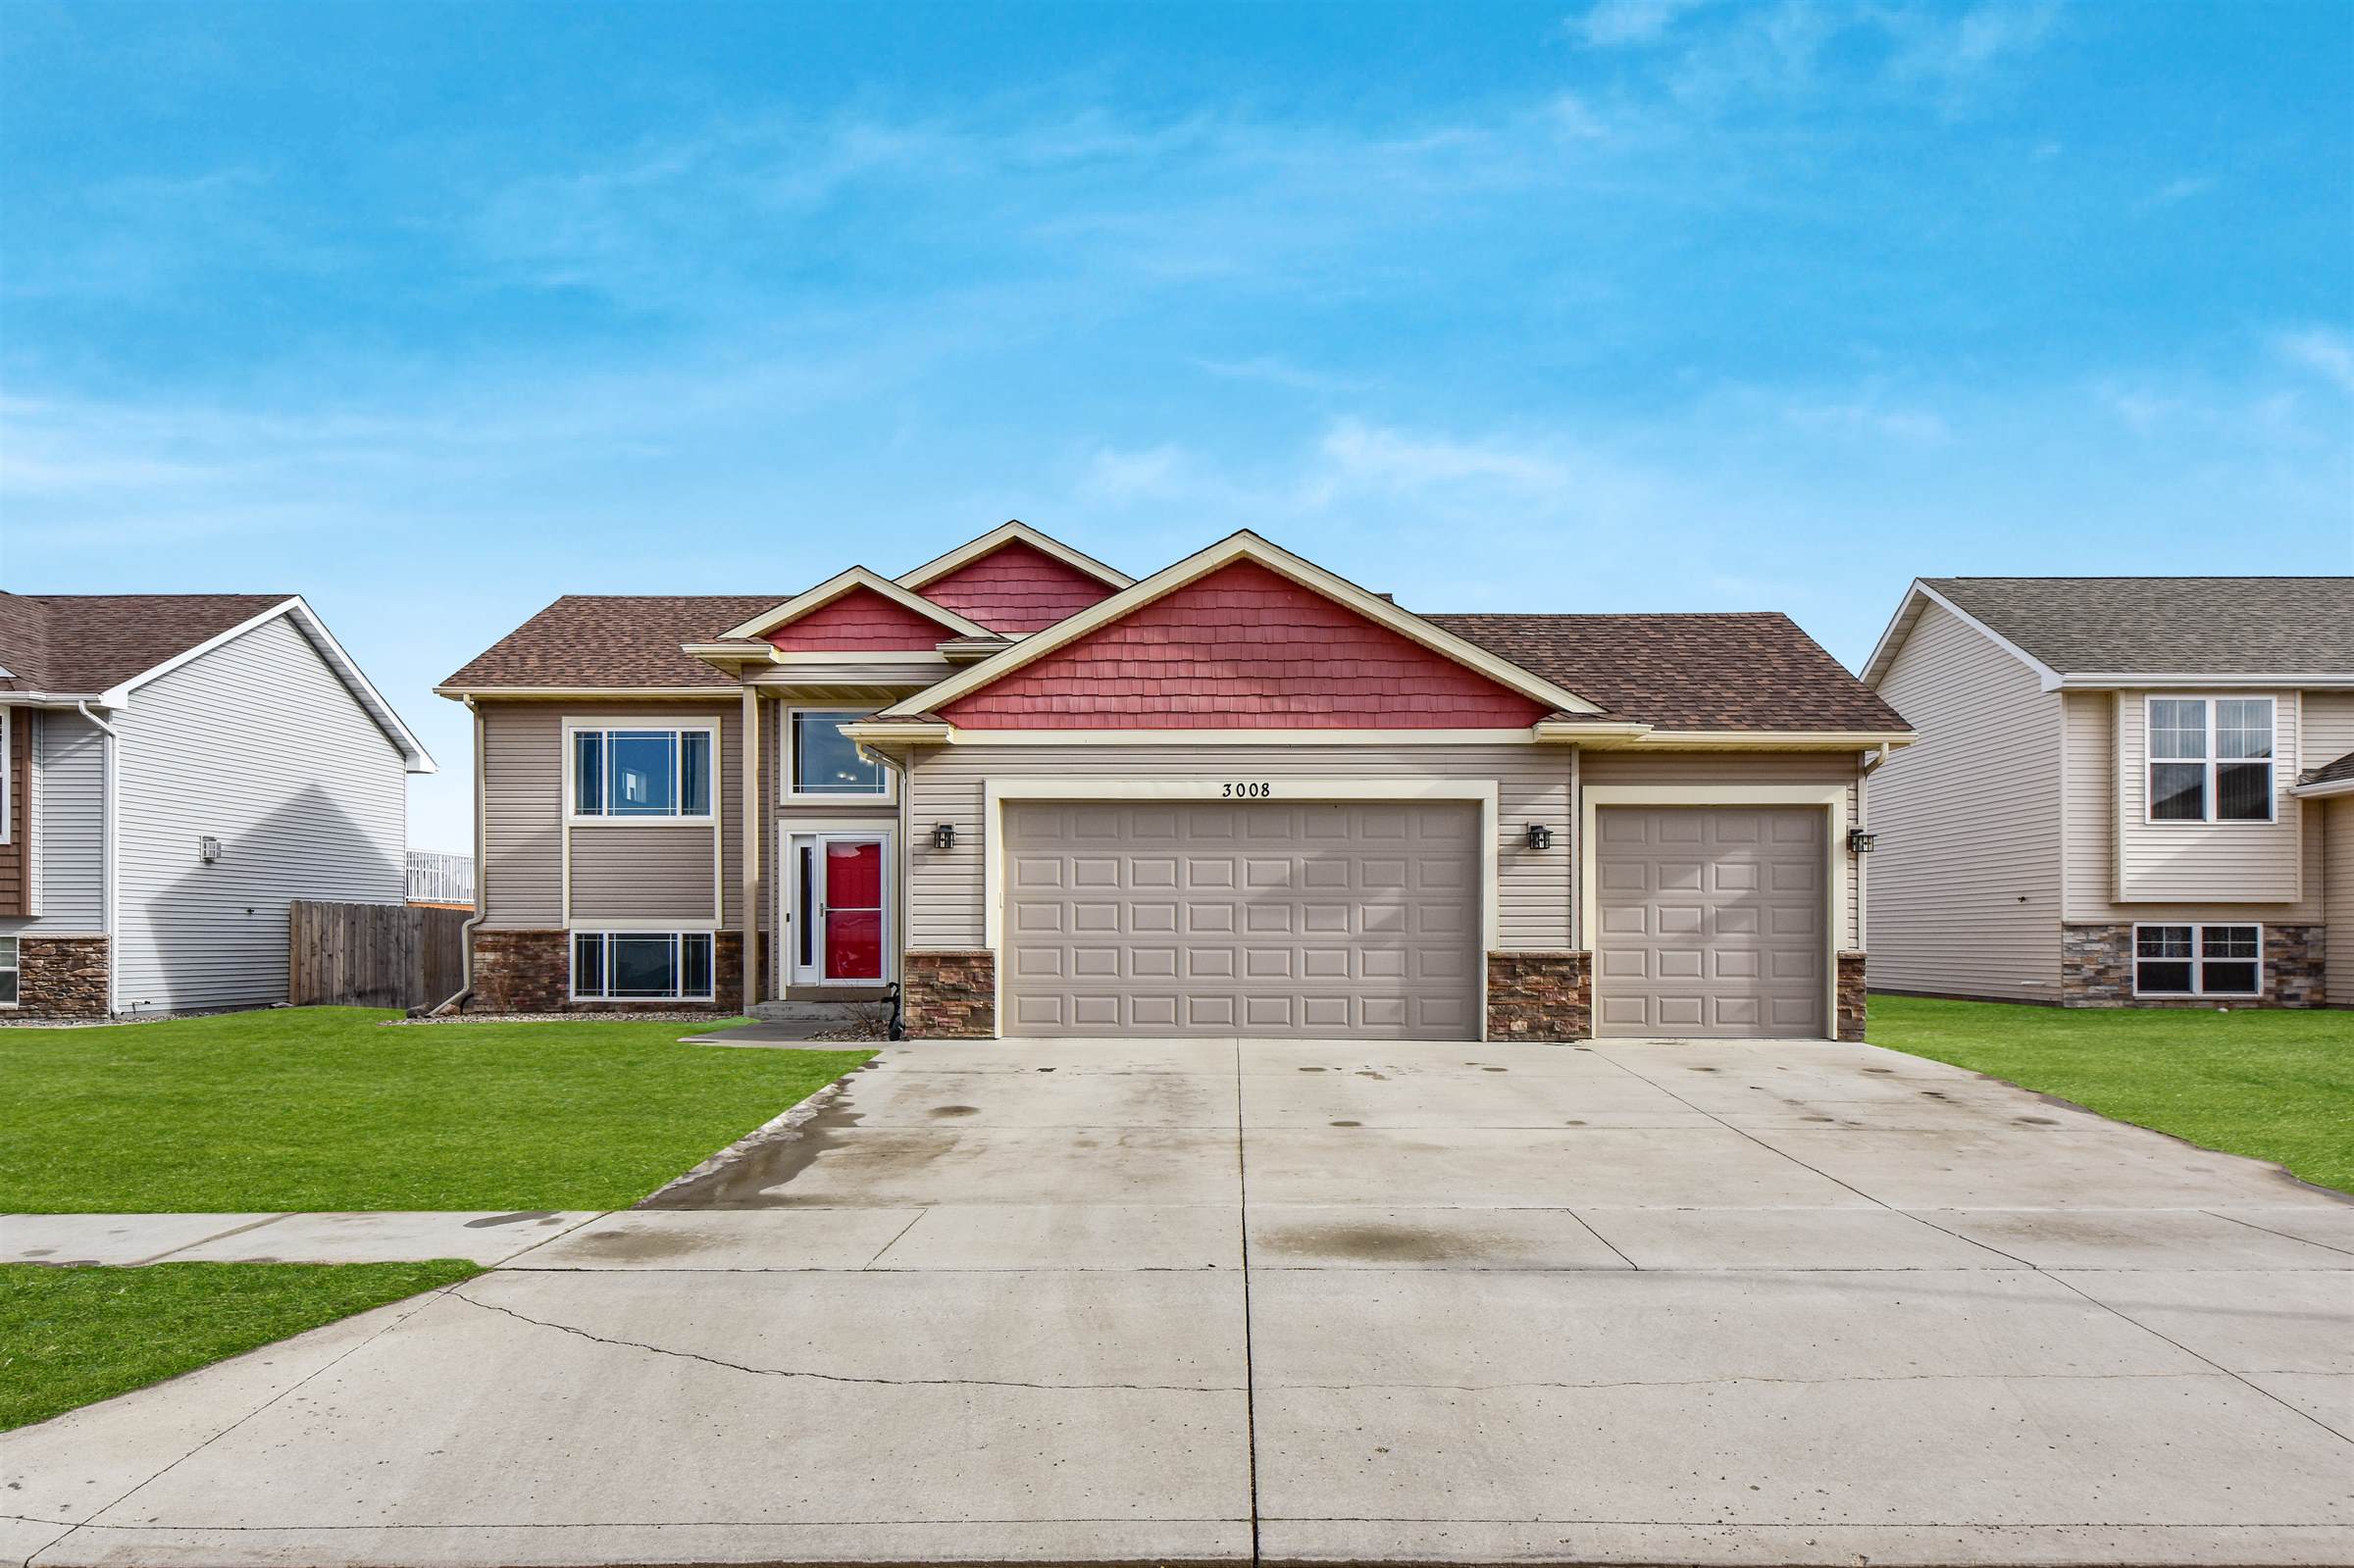 3008 10th St NW, Minot, ND 58703